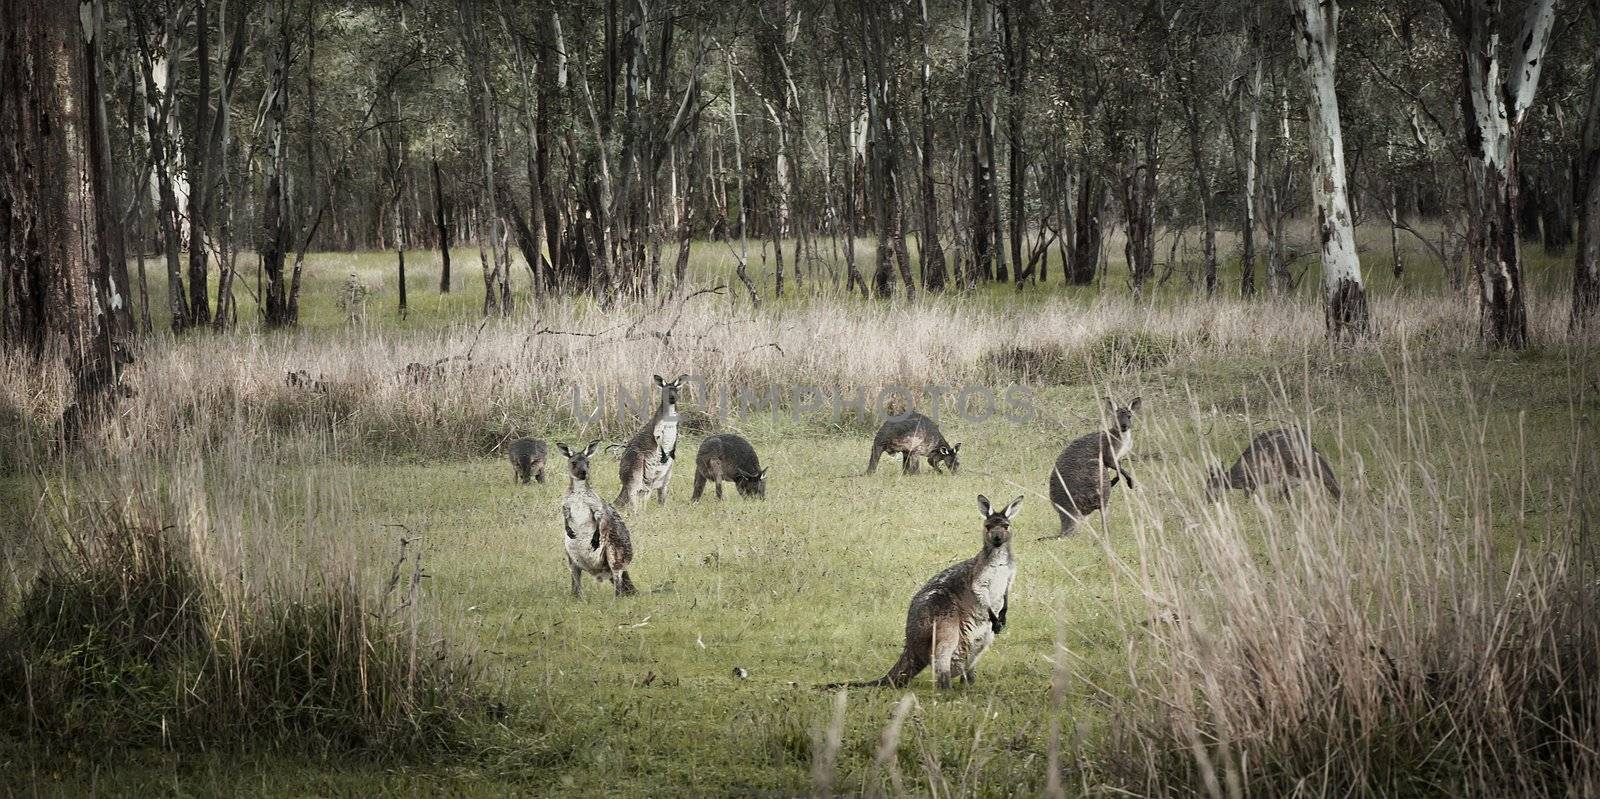 Kangaroos in a group in amongst the australian bush and trees.